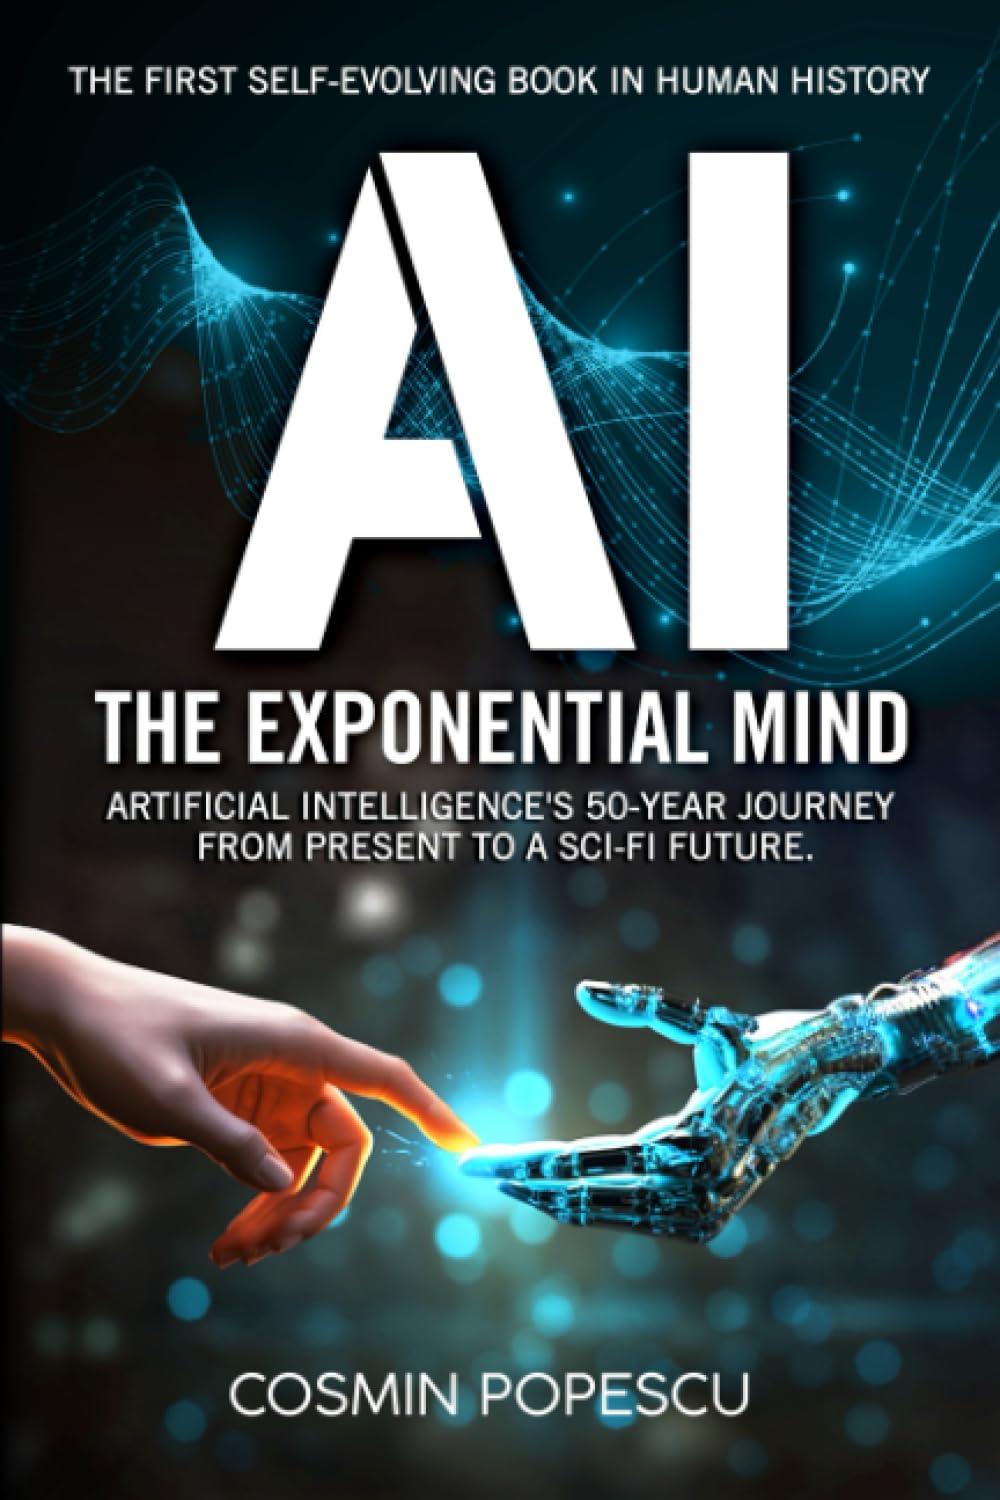 ai  the exponential mind the first self-evolving book in human history  artificial intelligence's 50-year